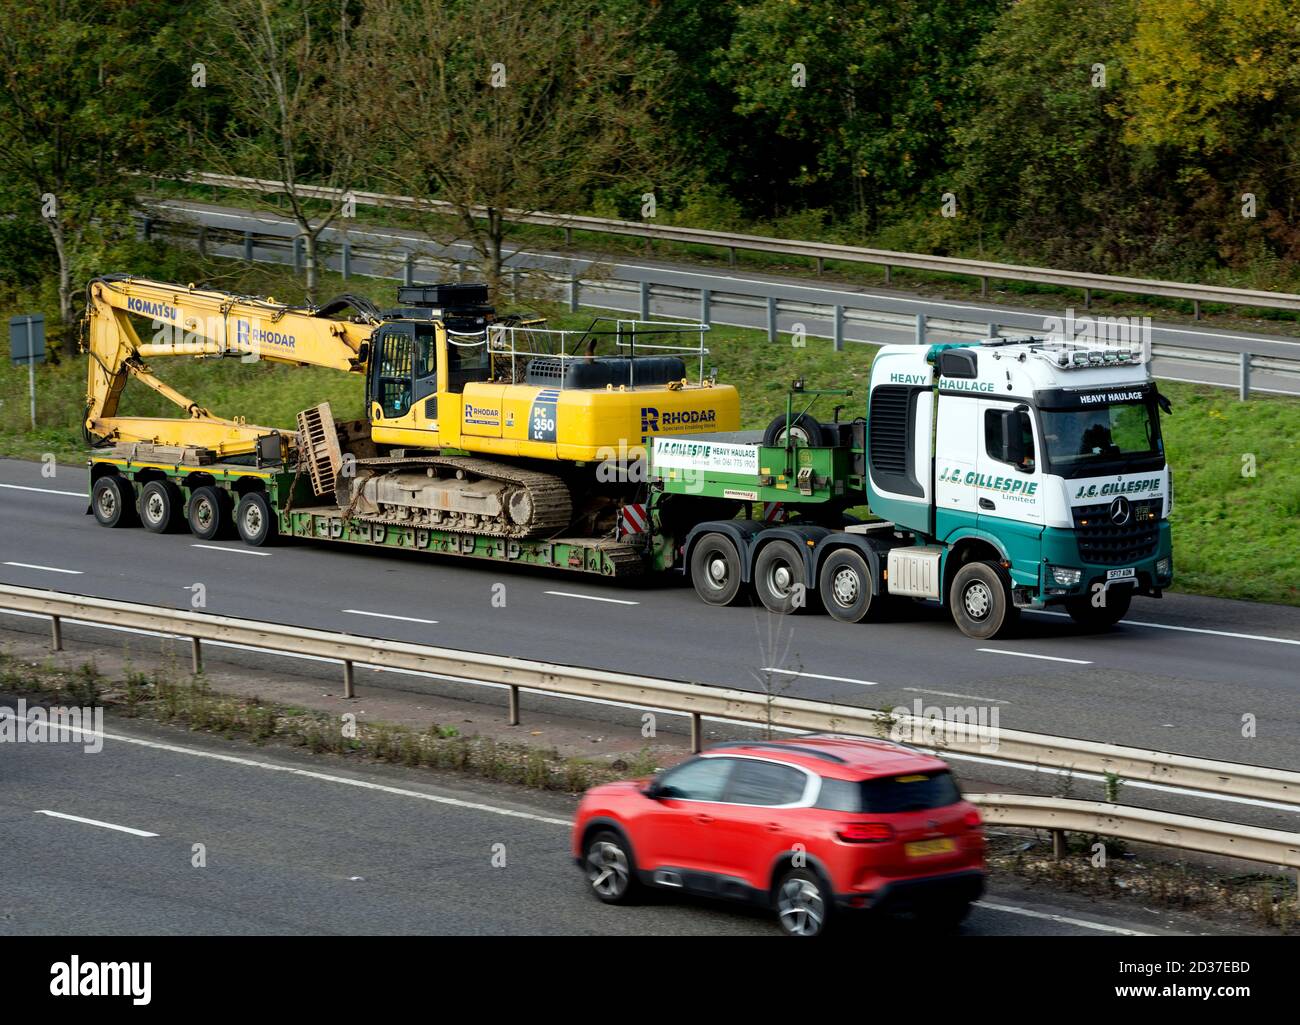 A large load on a low-loader lorry on the M40 motorway, Warwickshire, UK Stock Photo